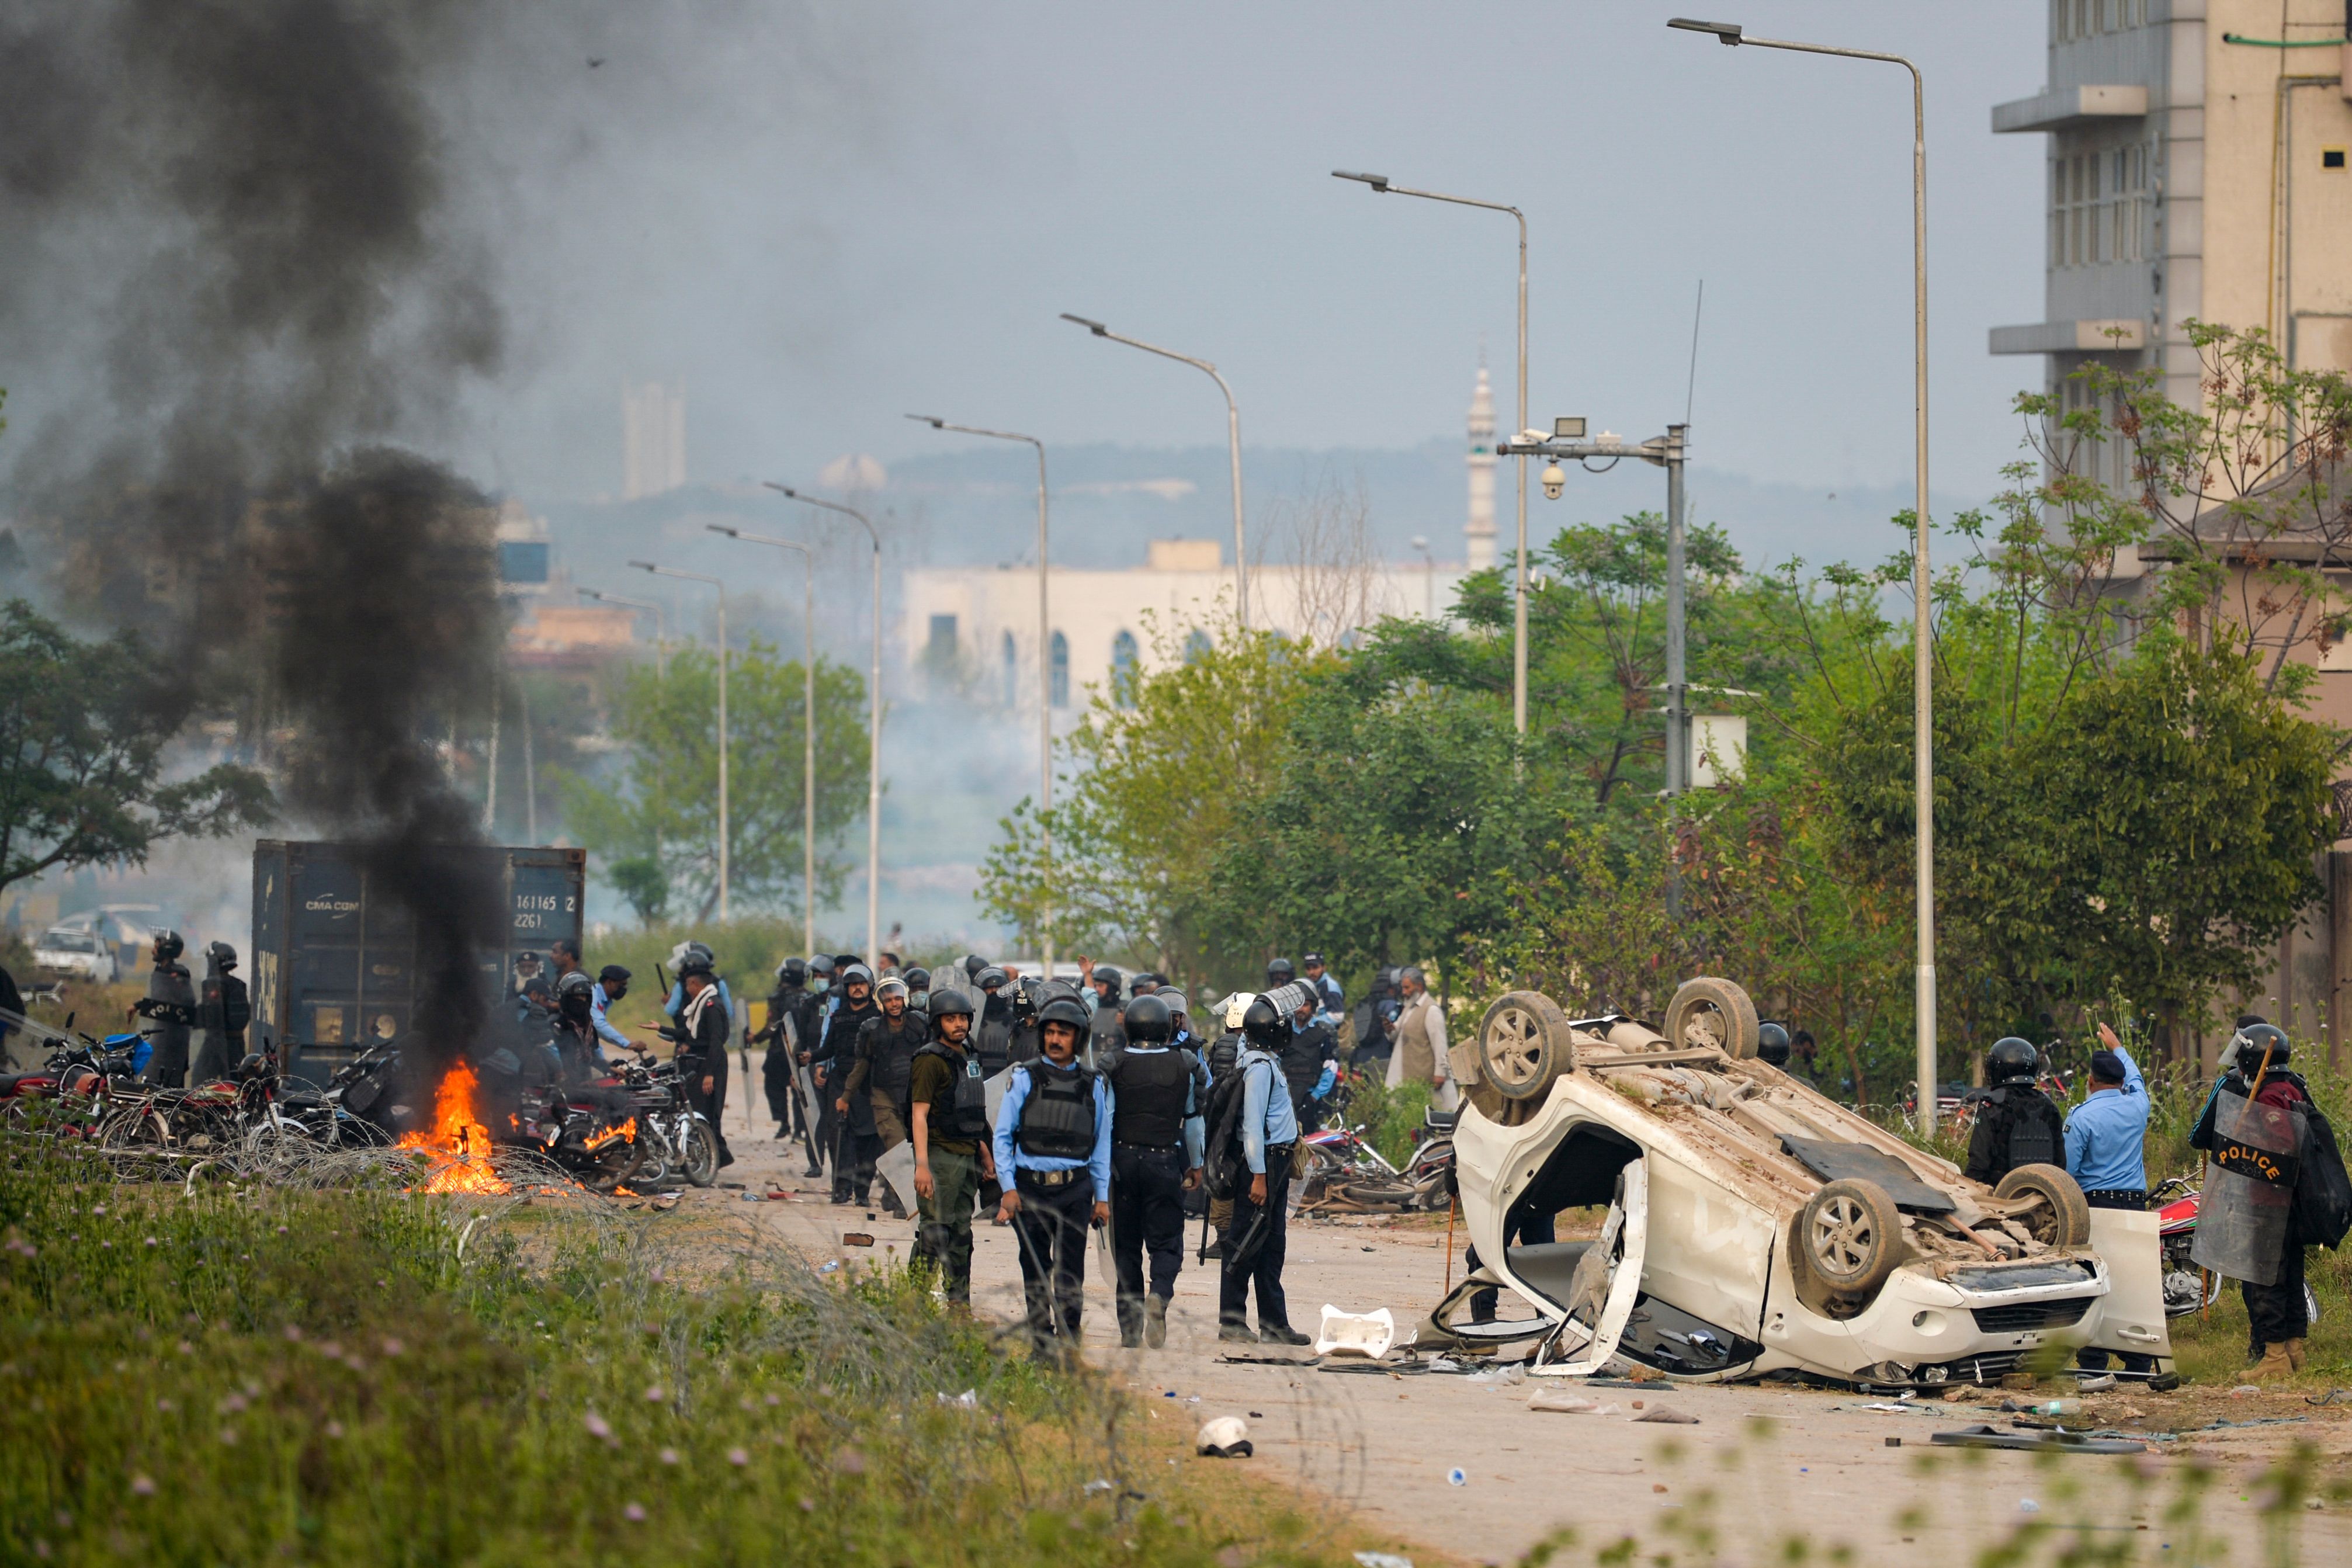 On the way there were clashes between Tehreek-e-Insaf workers and the police - Photo: AFP